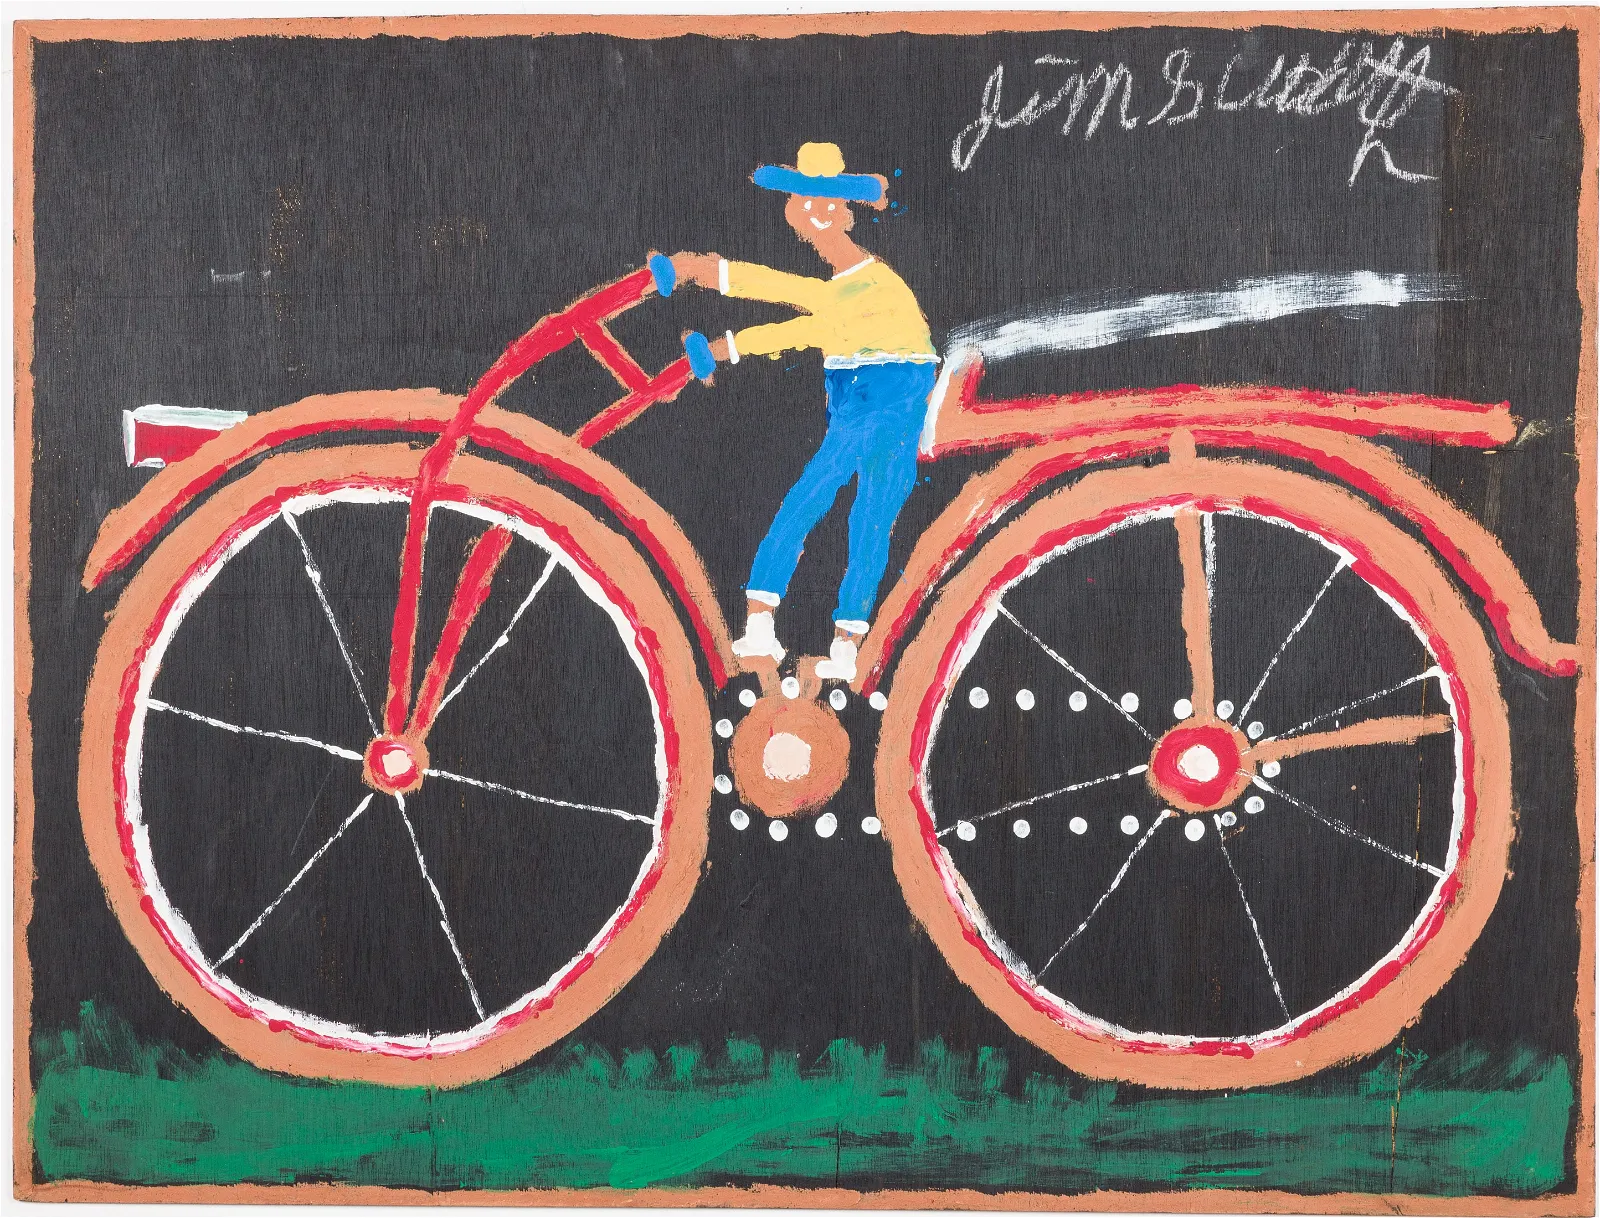 Jimmy Lee Sudduth, Bicycle Man, Paint on Board